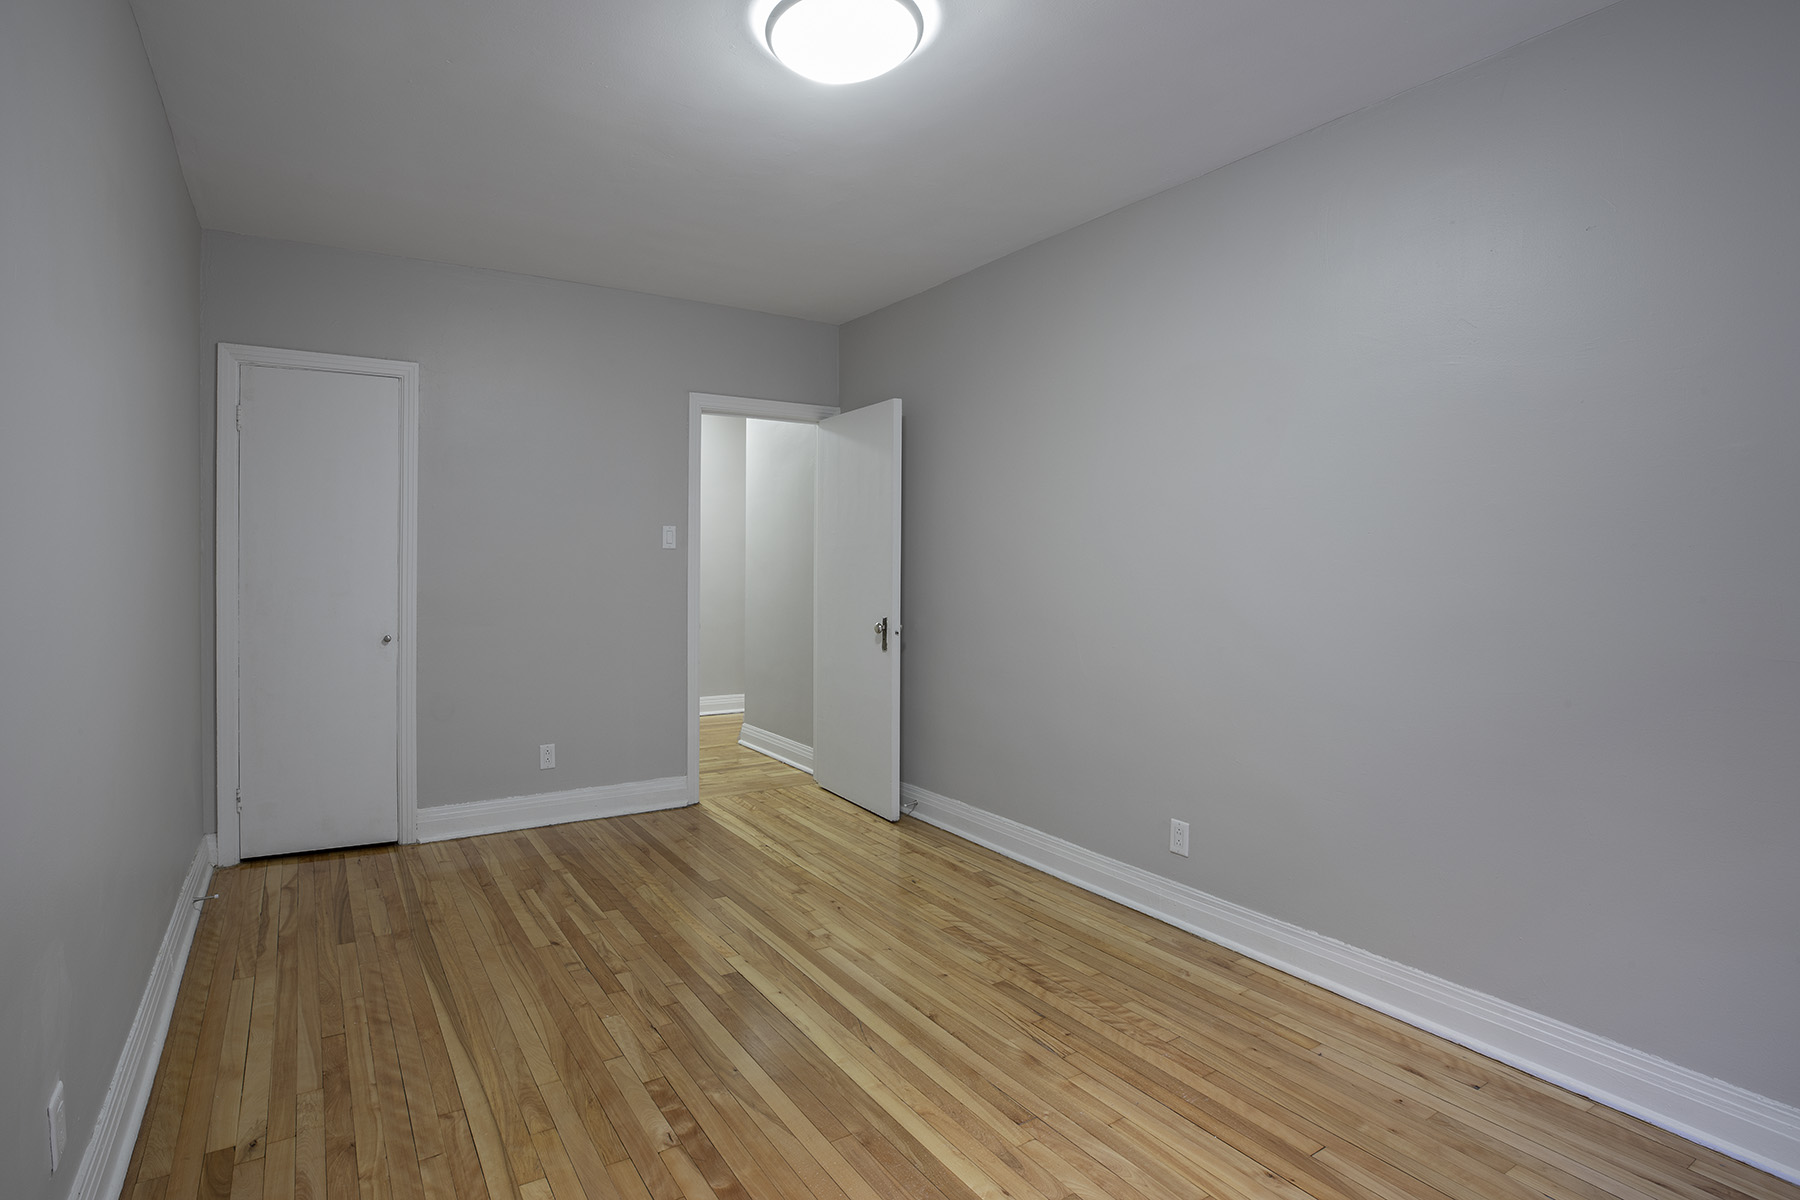 2 bedroom Apartments for rent in Cote-des-Neiges at 5000 Clanranald - Photo 07 - RentQuebecApartments – L401548